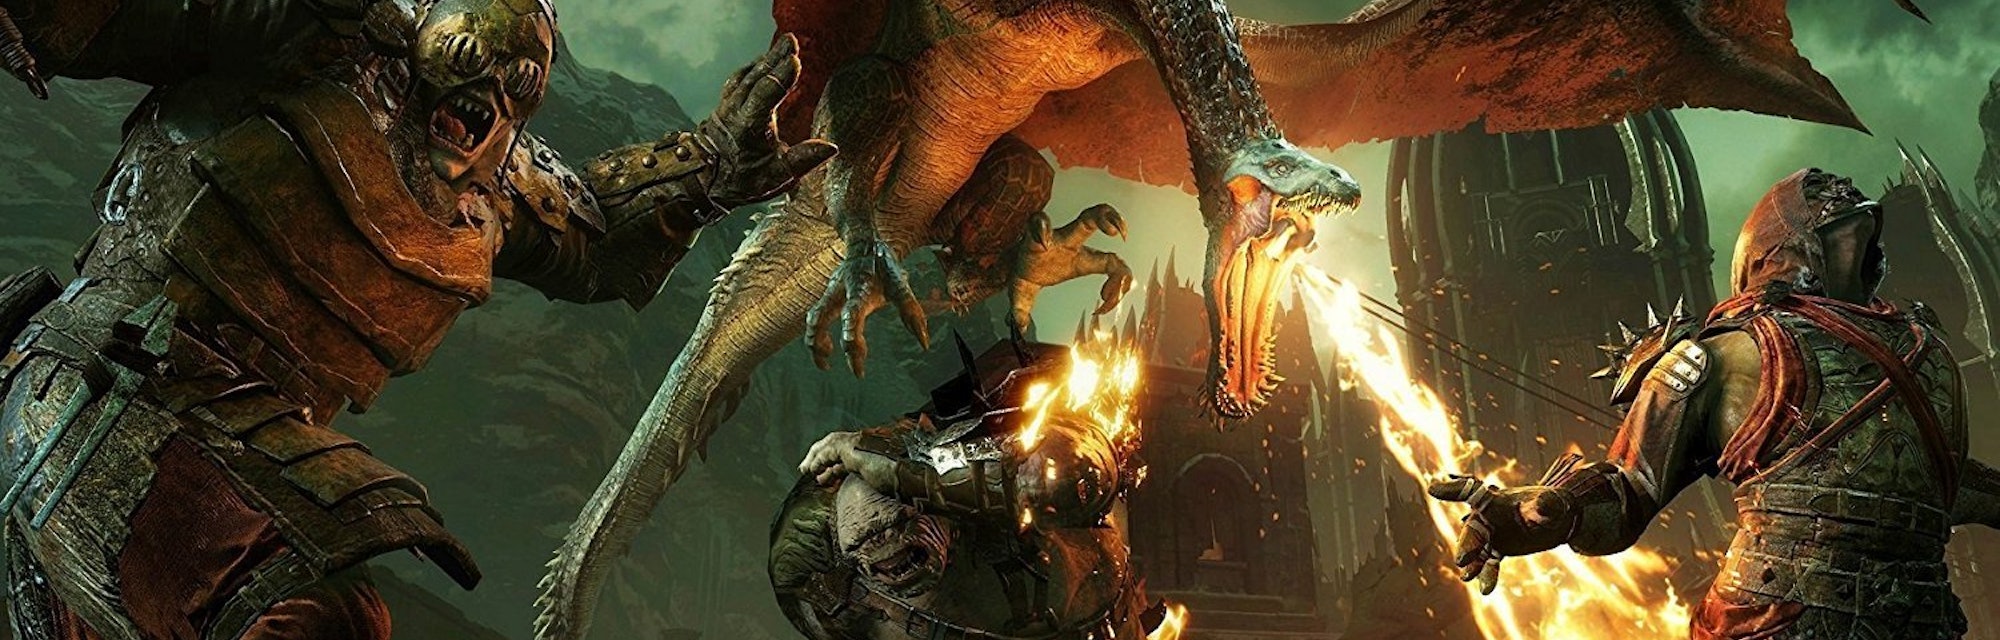 artwork from Middle-earth Shadow of War